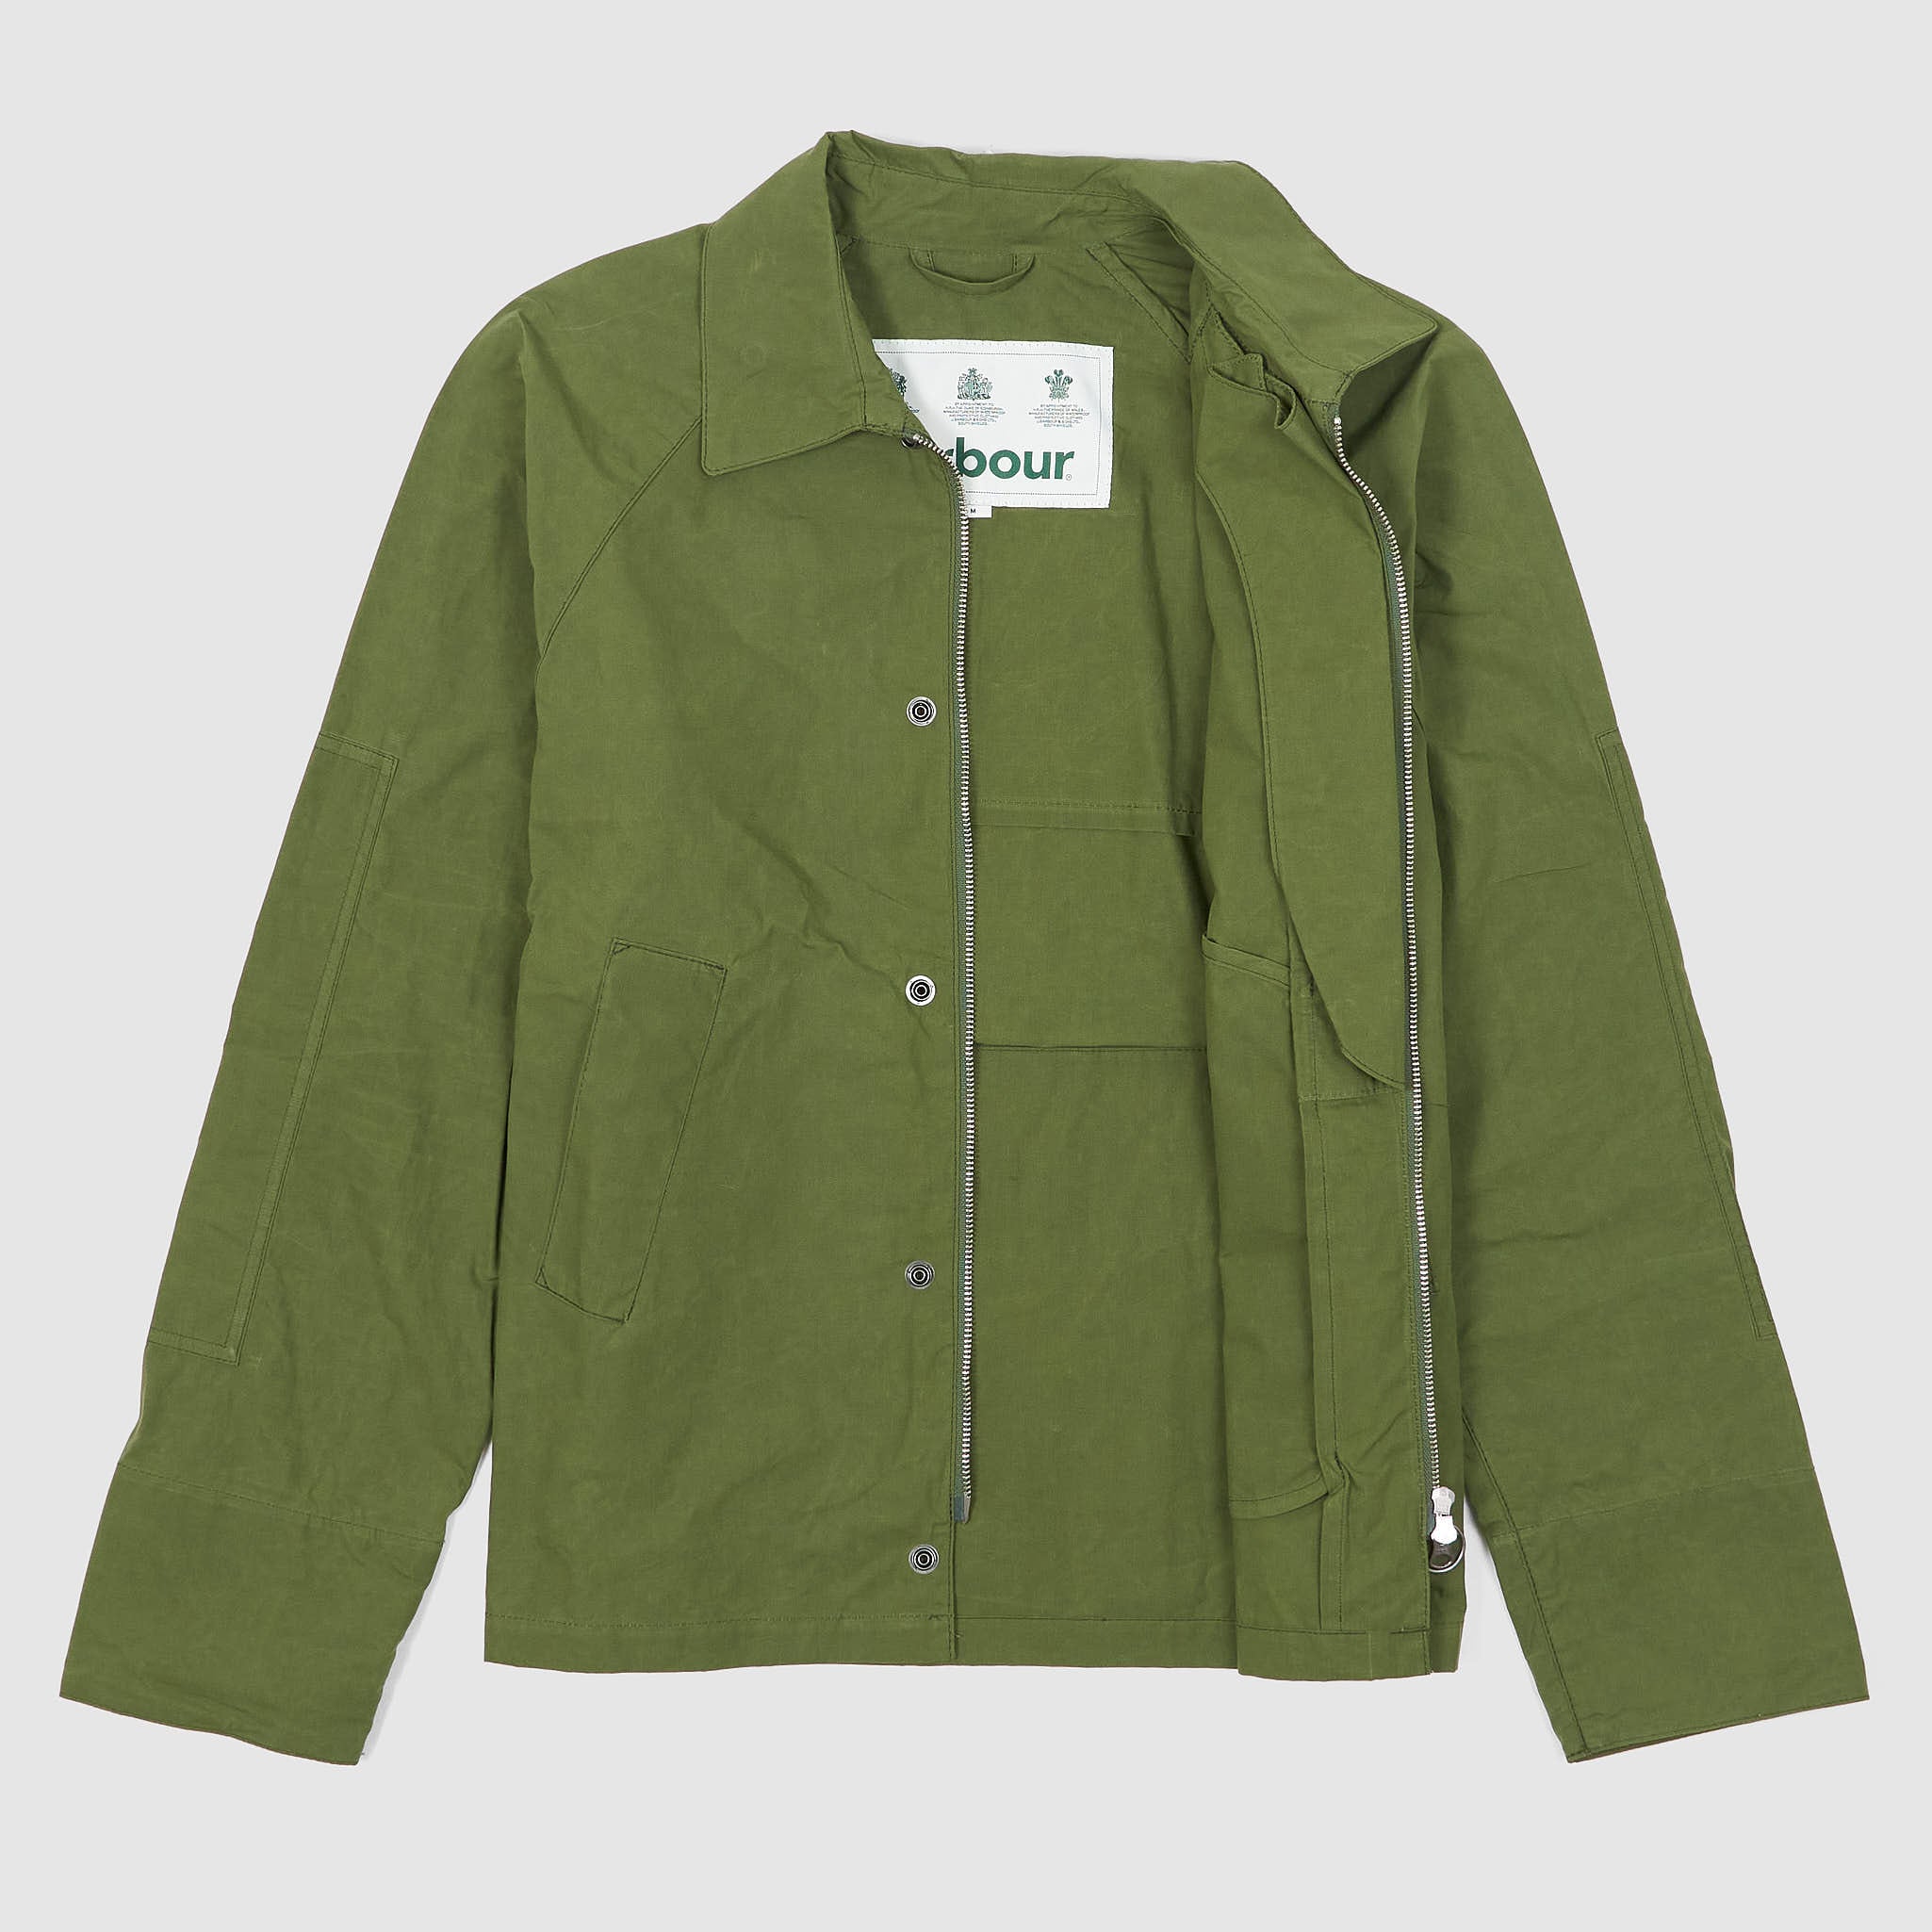 Barbour White Label Casual Summer Jacket - DeeCee style